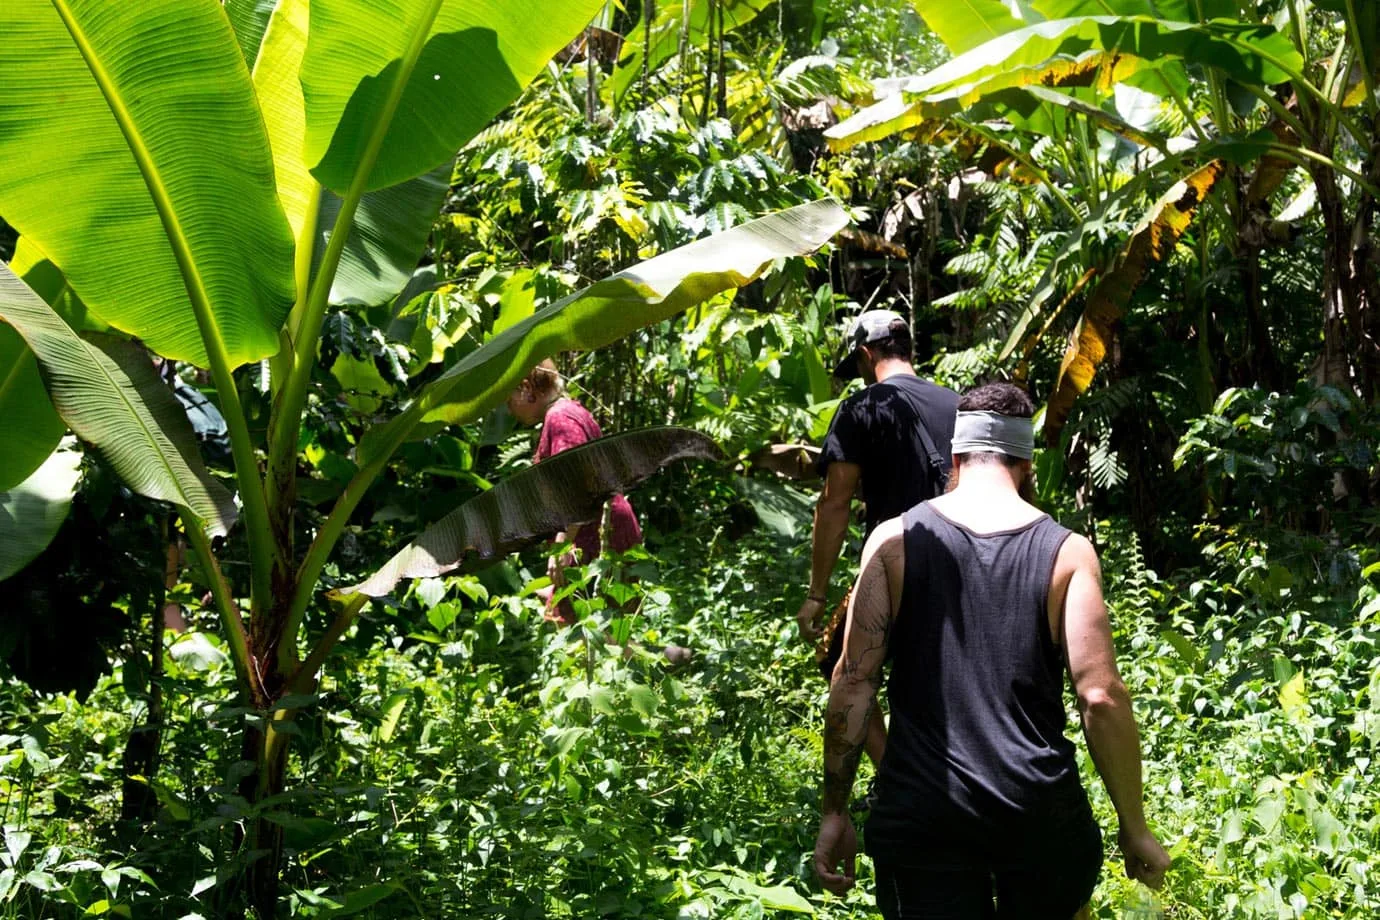 From the second waterfall to the third, we walked through a small coffee plantation